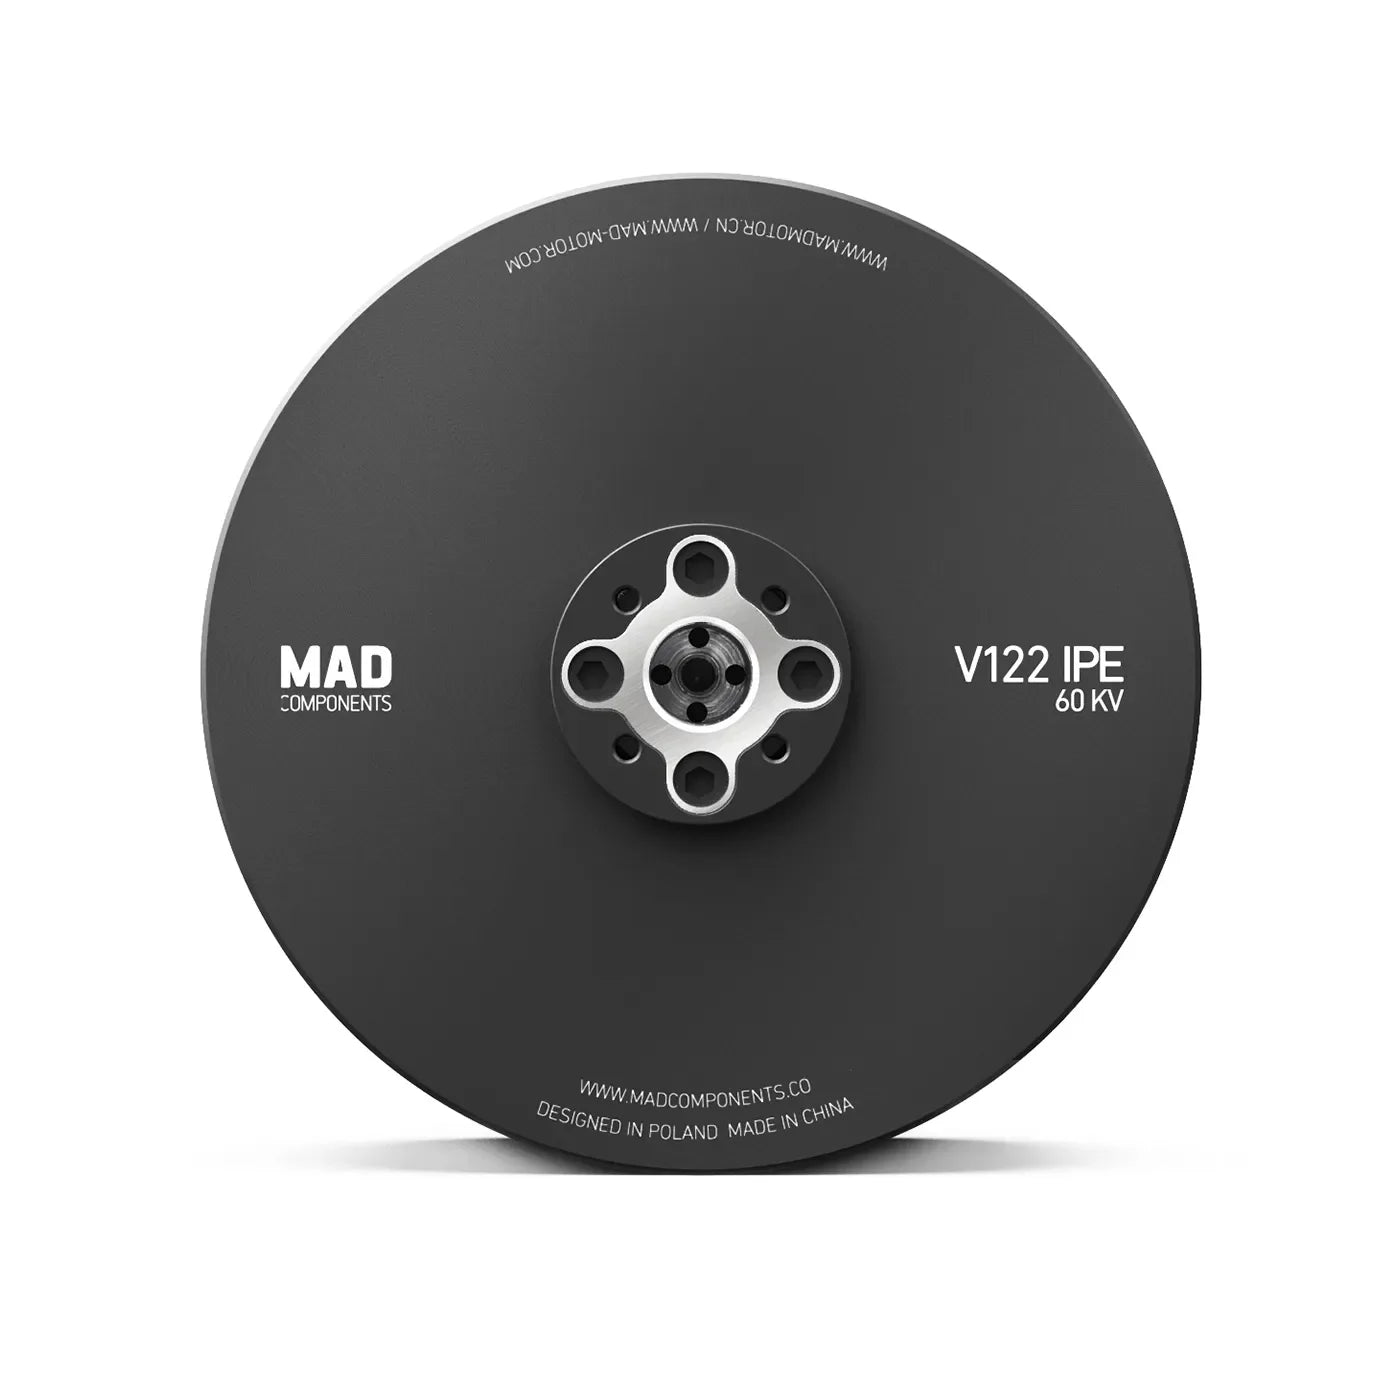 MAD V122 VTOL Drone Motor, High-performance VTOL drone motor for 76KG quadcopters or 114KG hexacopters, designed and manufactured by MAD Components.